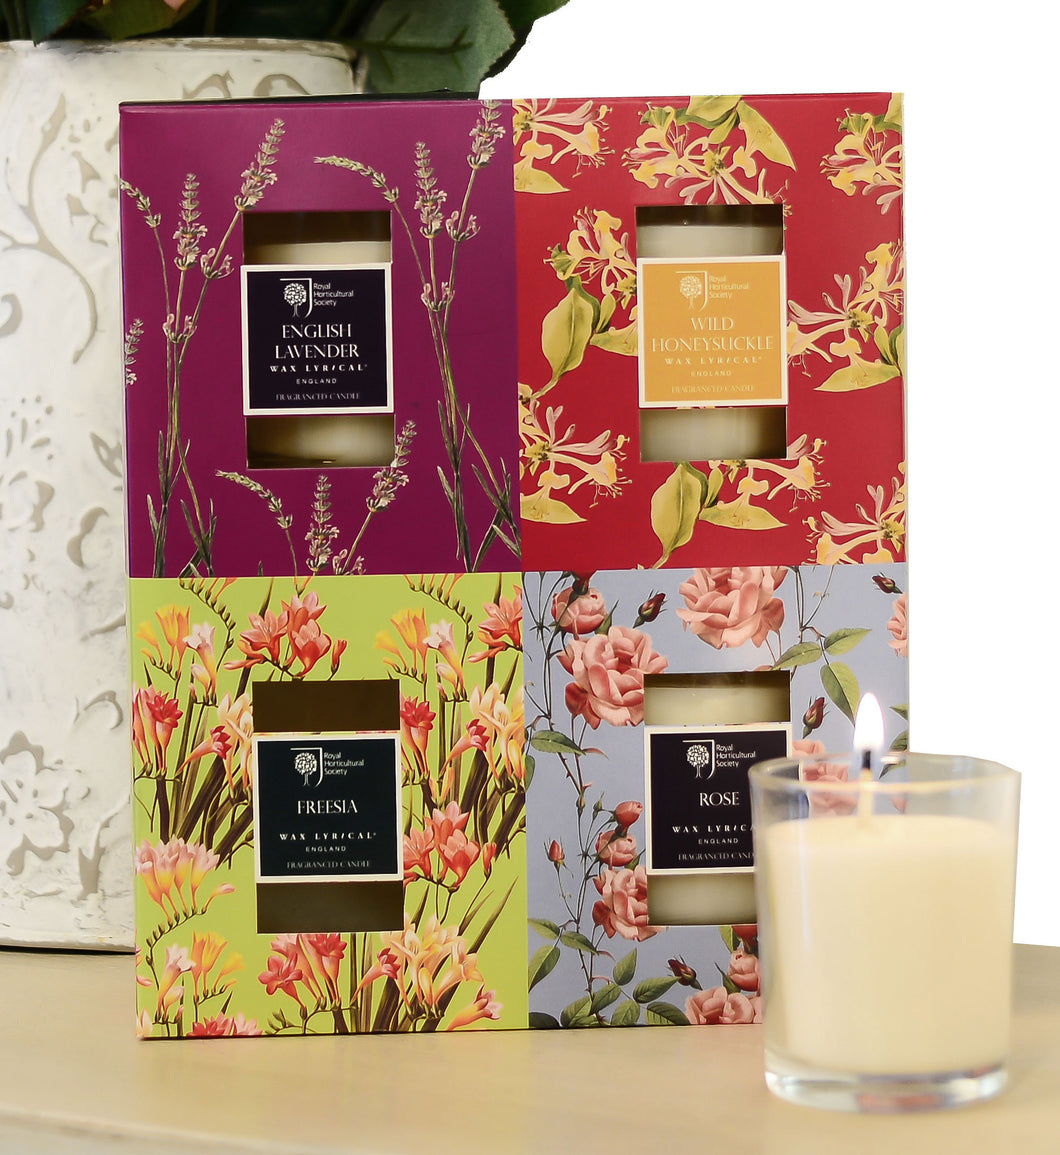 Wax Lyrical RHS Fragrant Garden 4 Candle Gift Set Assorted Votives - LAST FEW AVAILABLE!